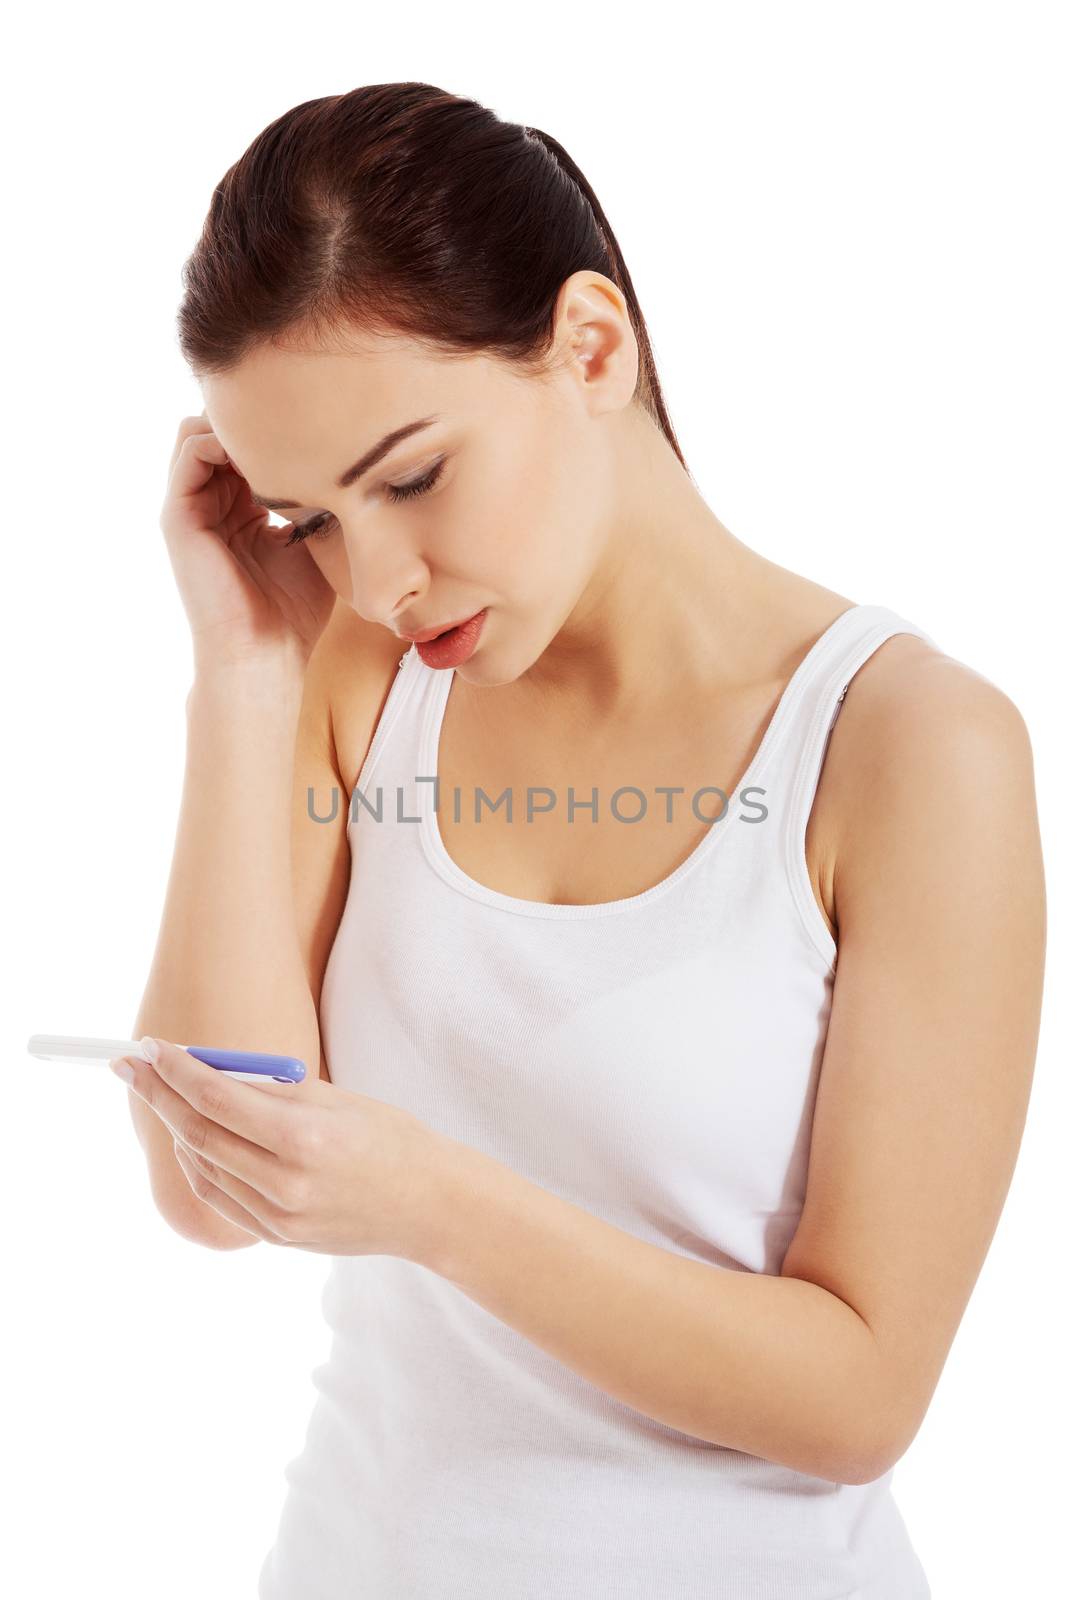 Sad, worried woman with pregnancy test. Isolated on white.